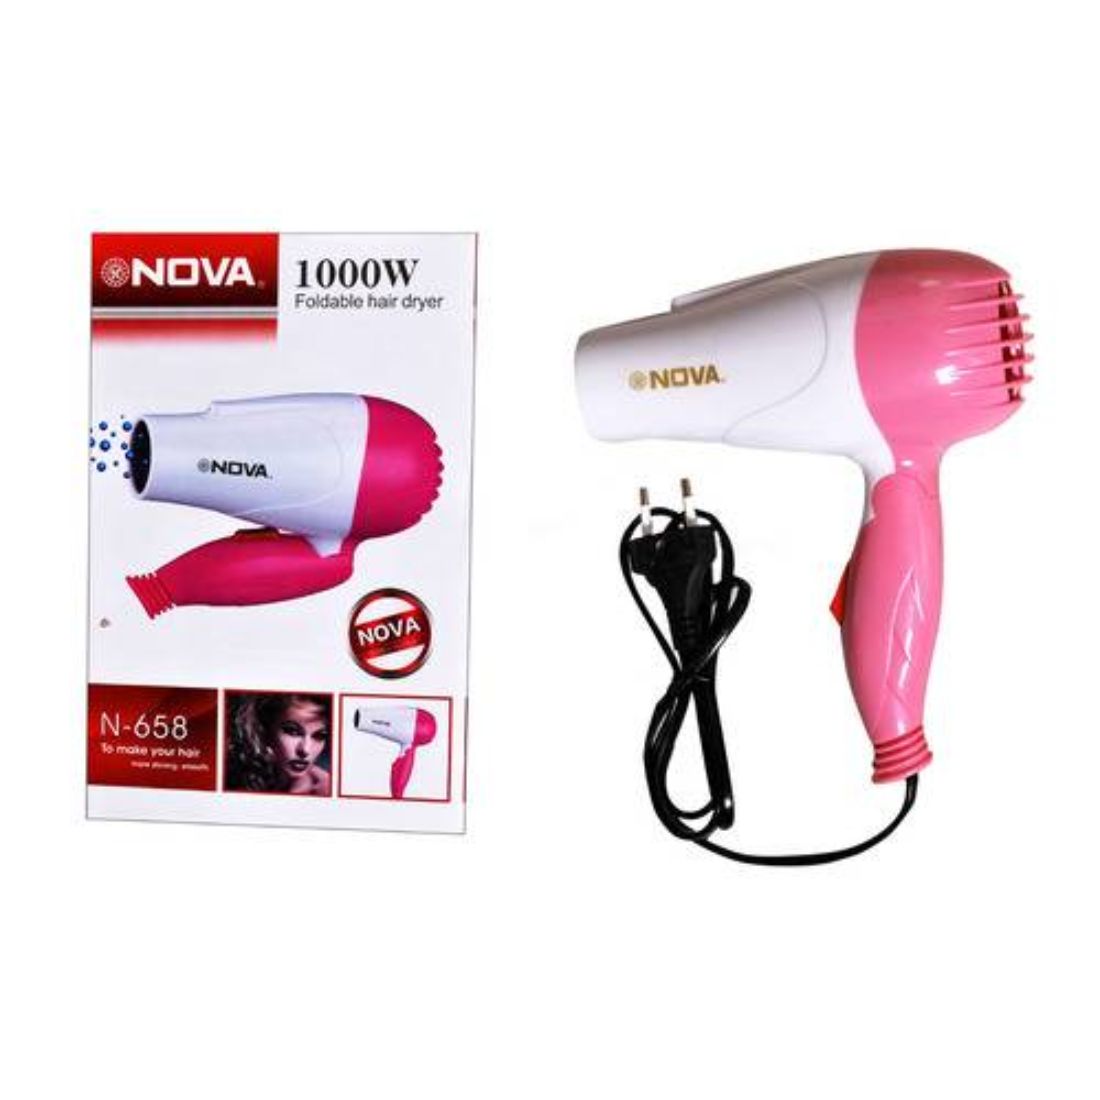 Professional Folding 1290-B Hair Dryer With 2-Speed Control - Efficient & Protective Hair Drying